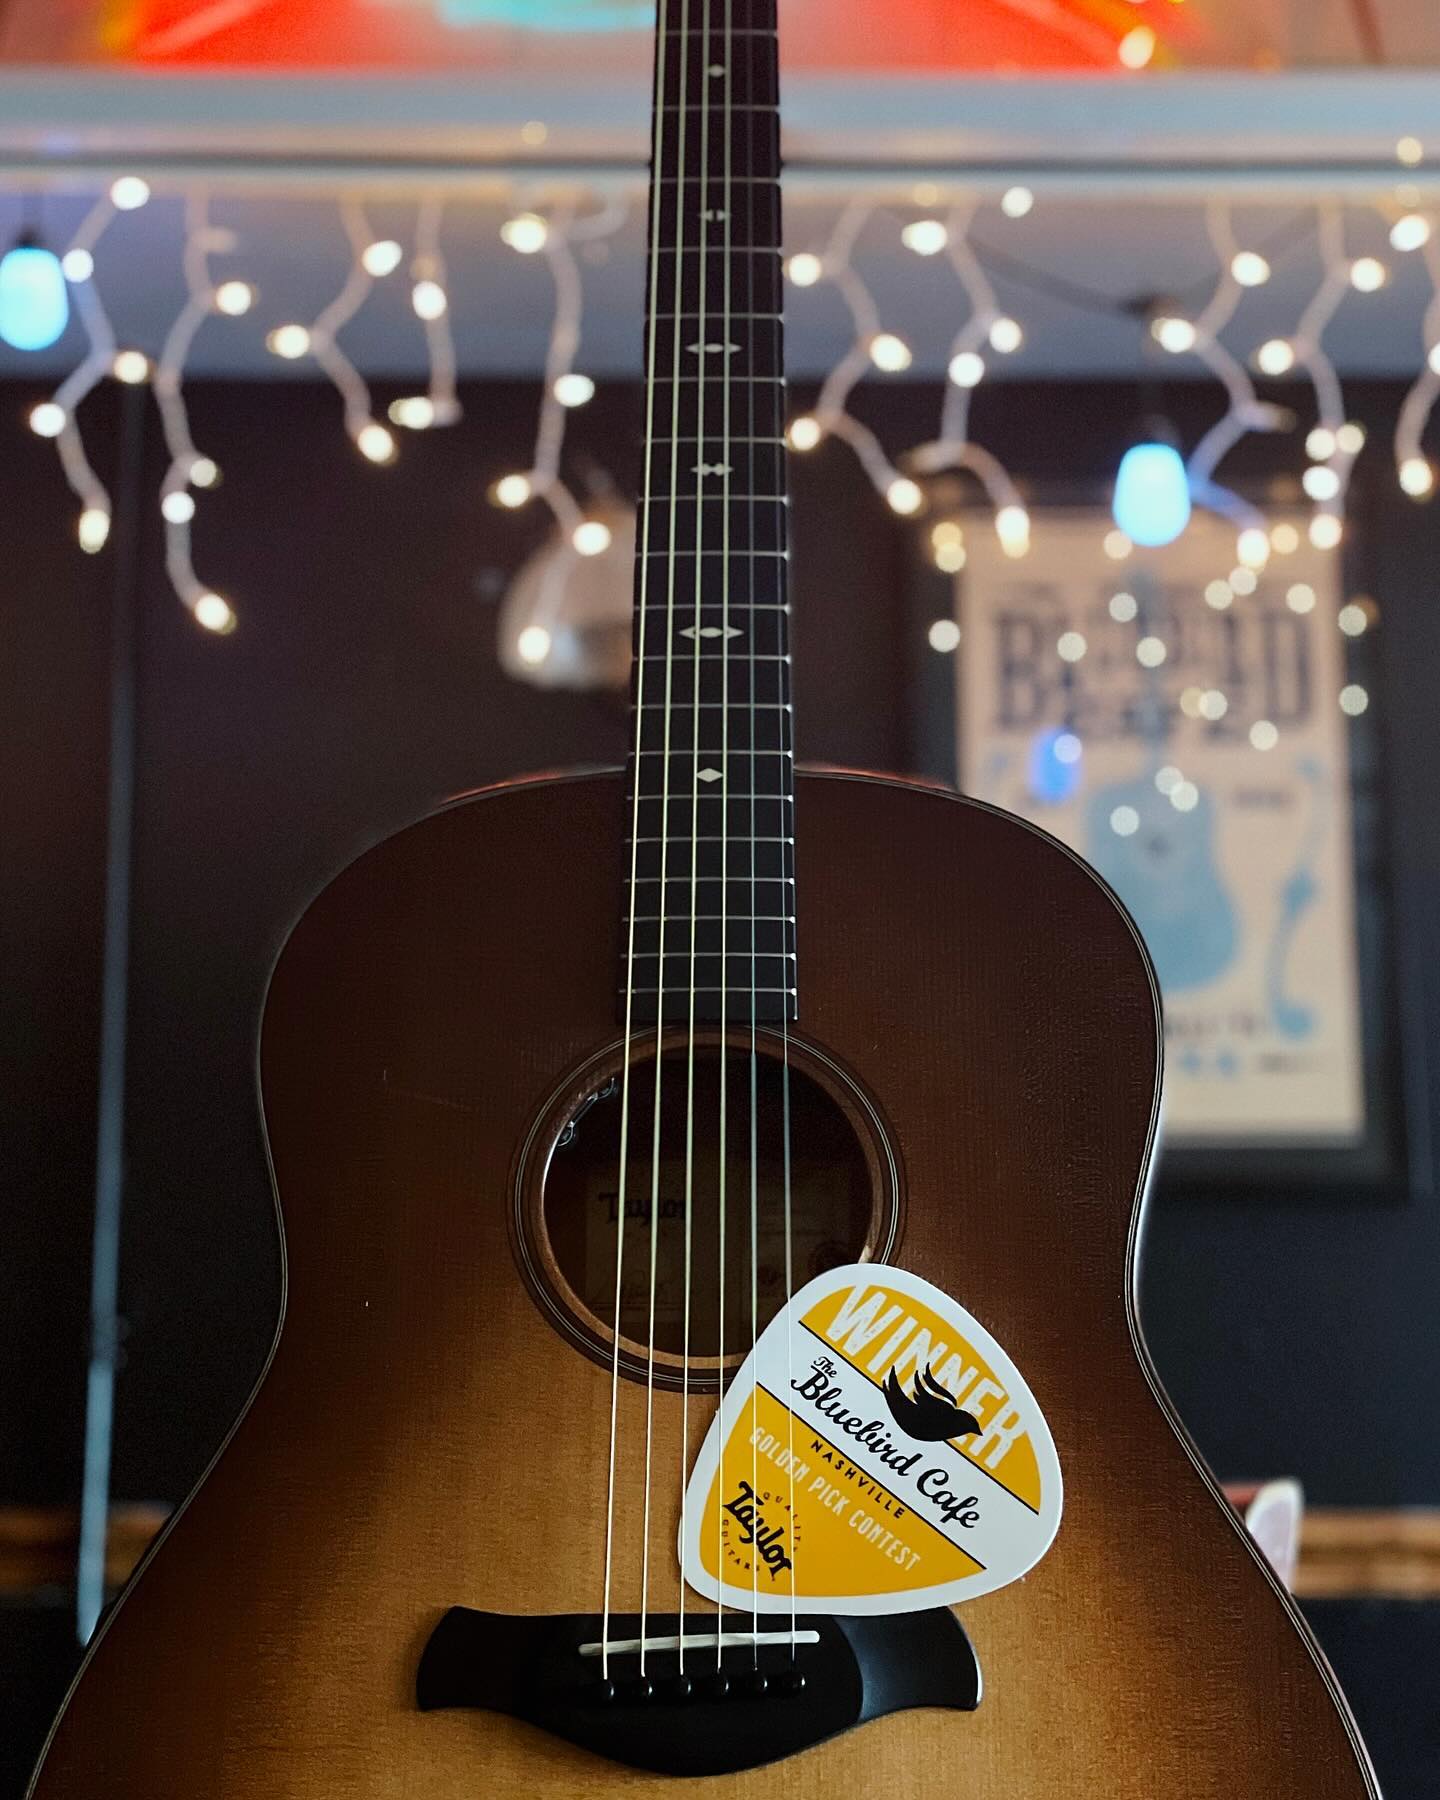 Did you know that there’s a new winner crowned every month for the #BluebirdGoldenPick contest? Thanks to @taylorguitars